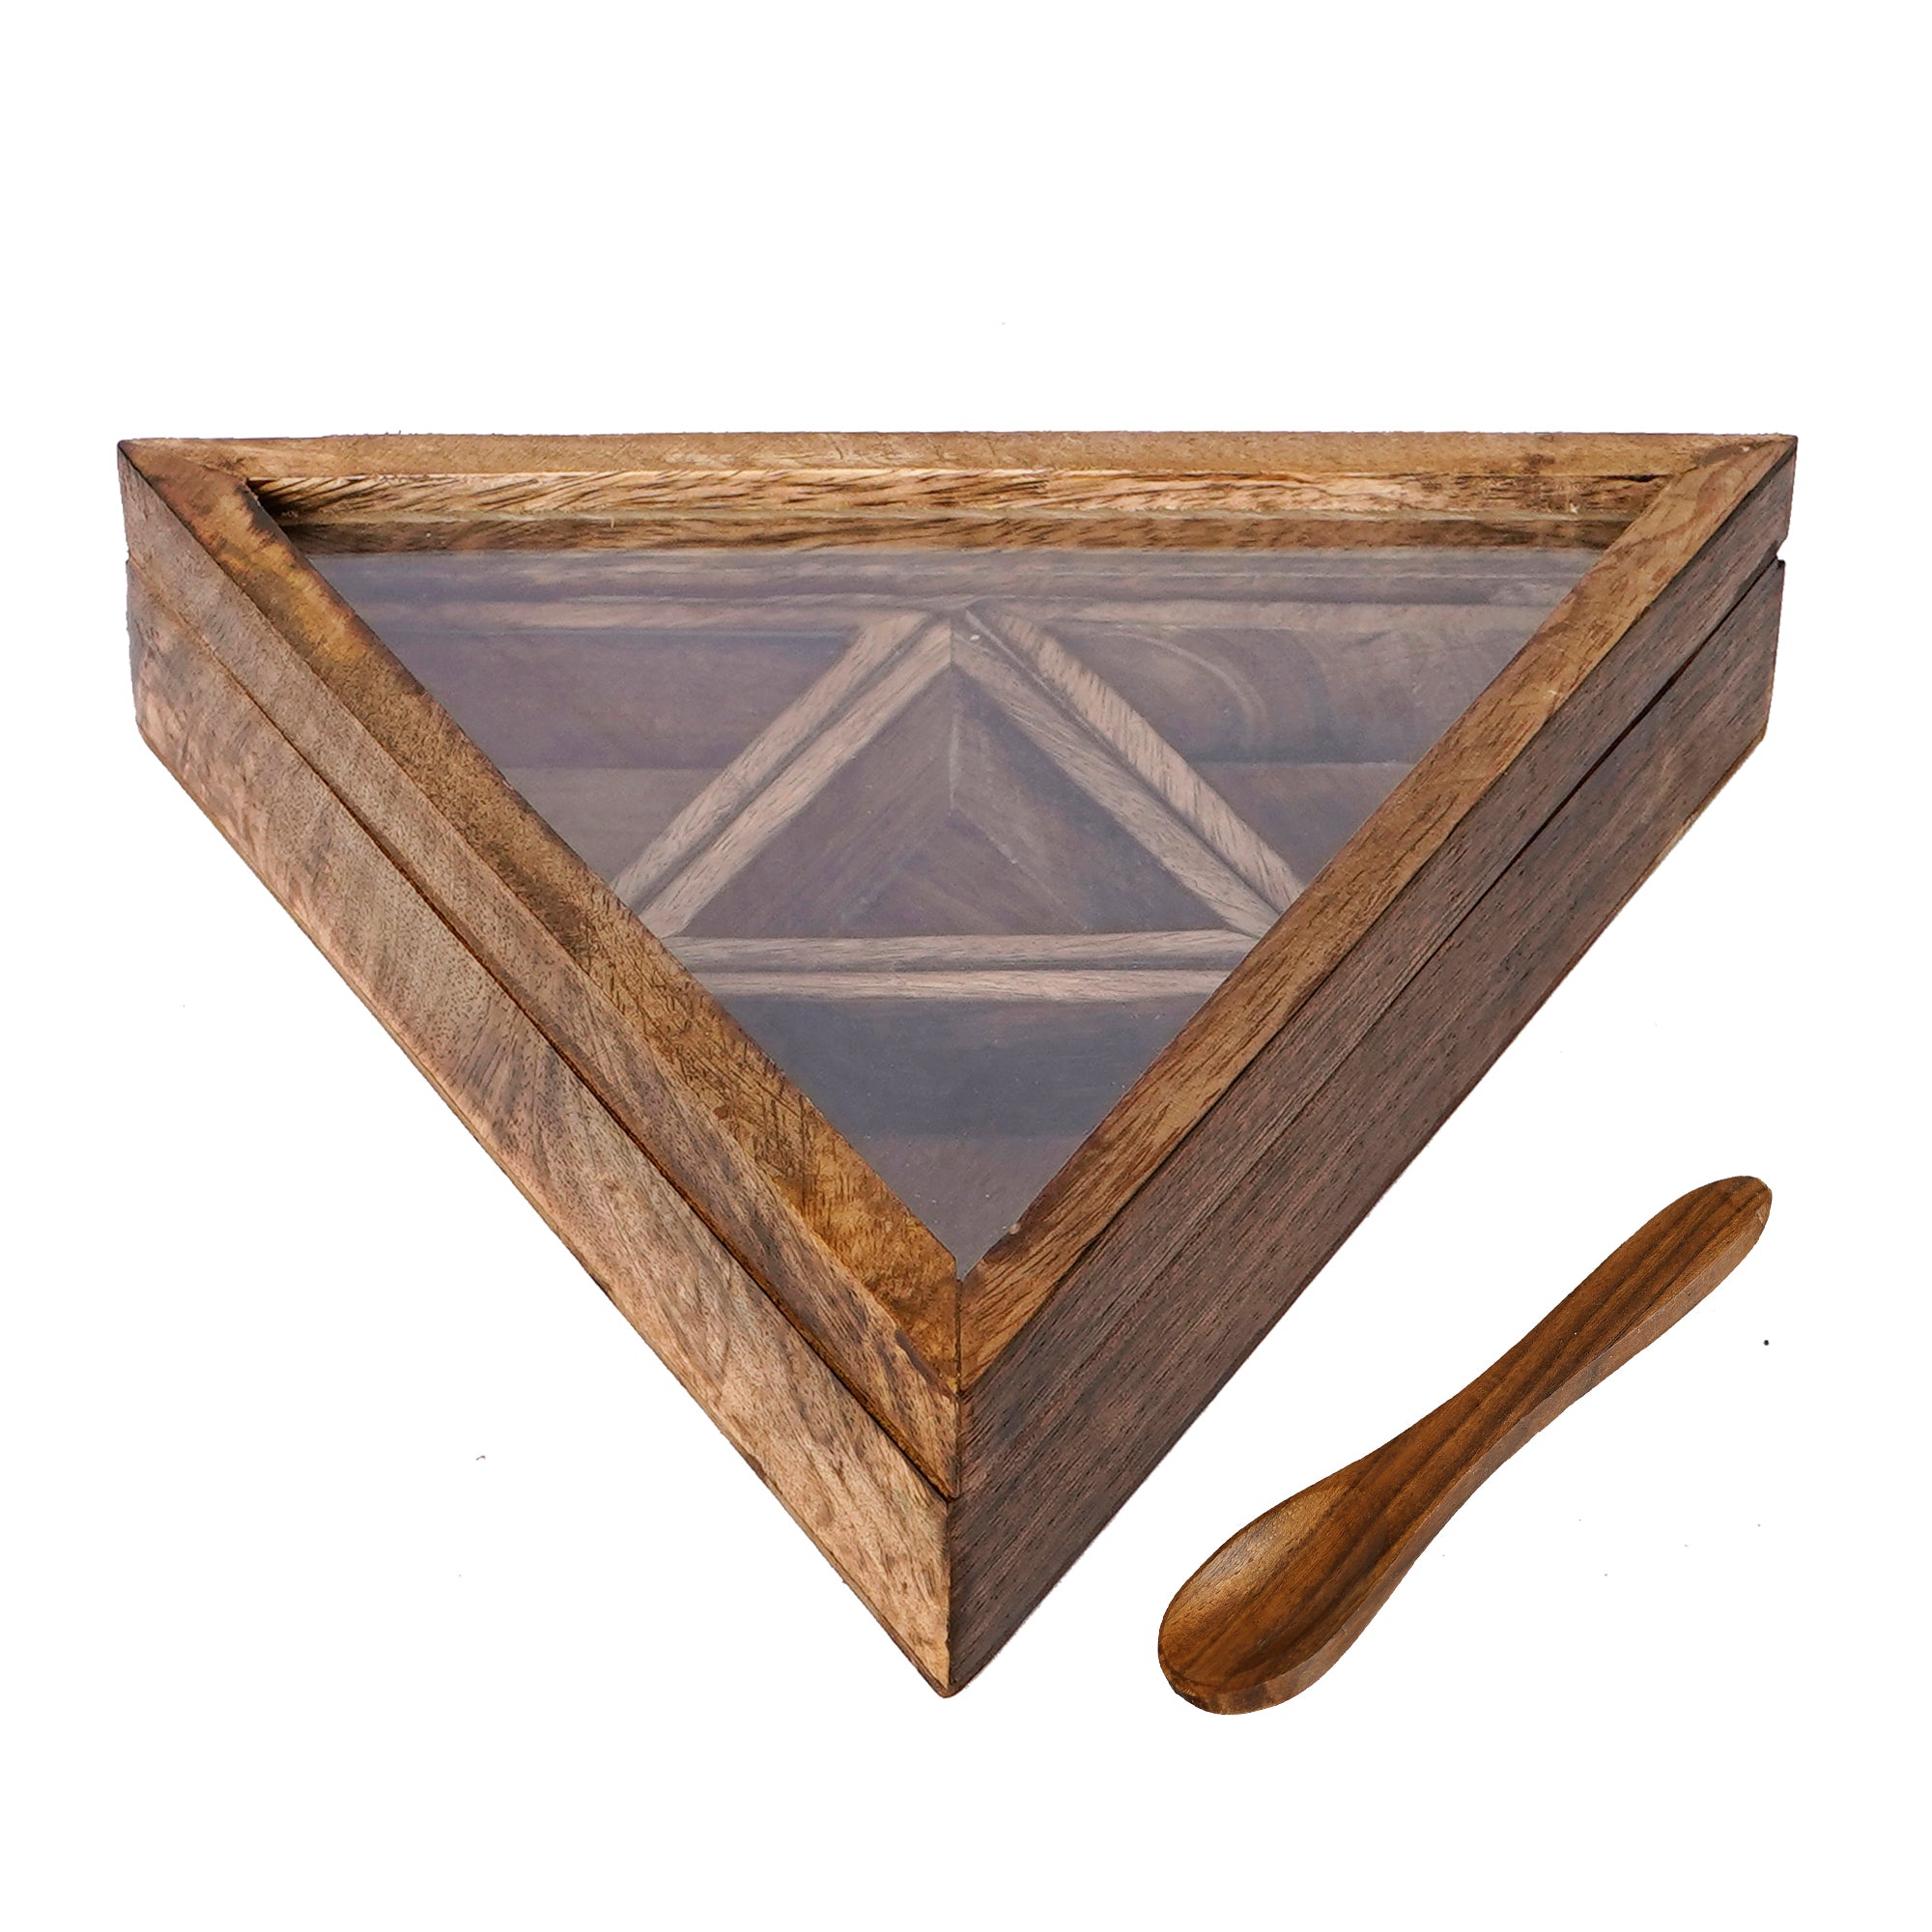 Brown 4 Triangle Compartments Handcrafted Wooden Spice Box 2